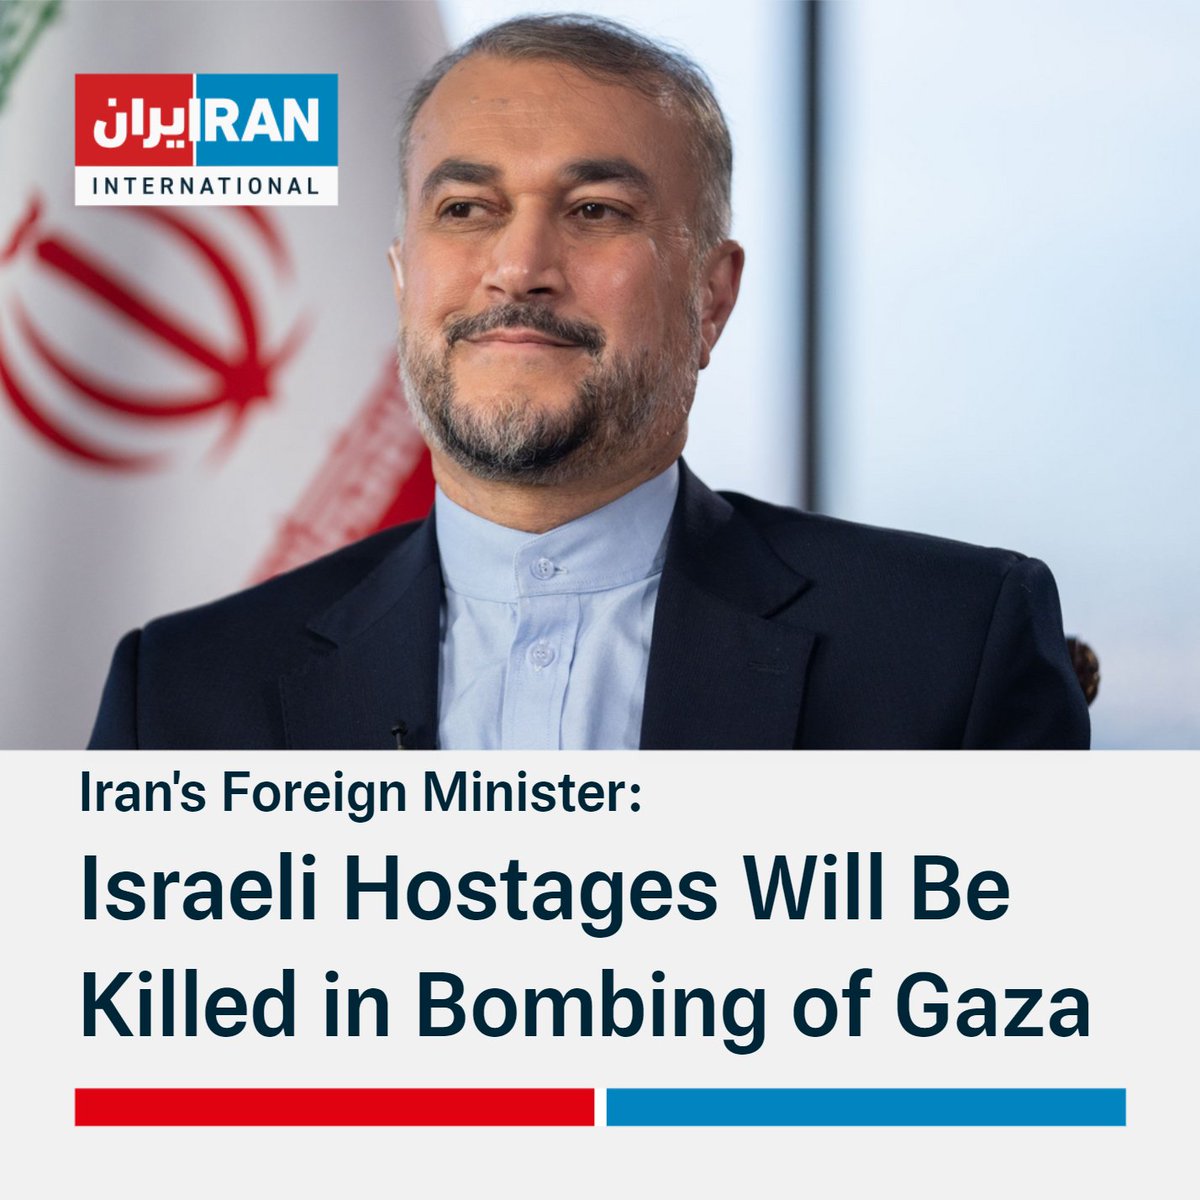 Iran's Foreign Minister @Amirabdolahian says Israeli hostages won't be released through resumption of war. They will rather be killed in the bombings, he added.It seems they're not thinking about the difficult consequences of returning to war. Before it is too late, immediately stop the attacks on Gaza.